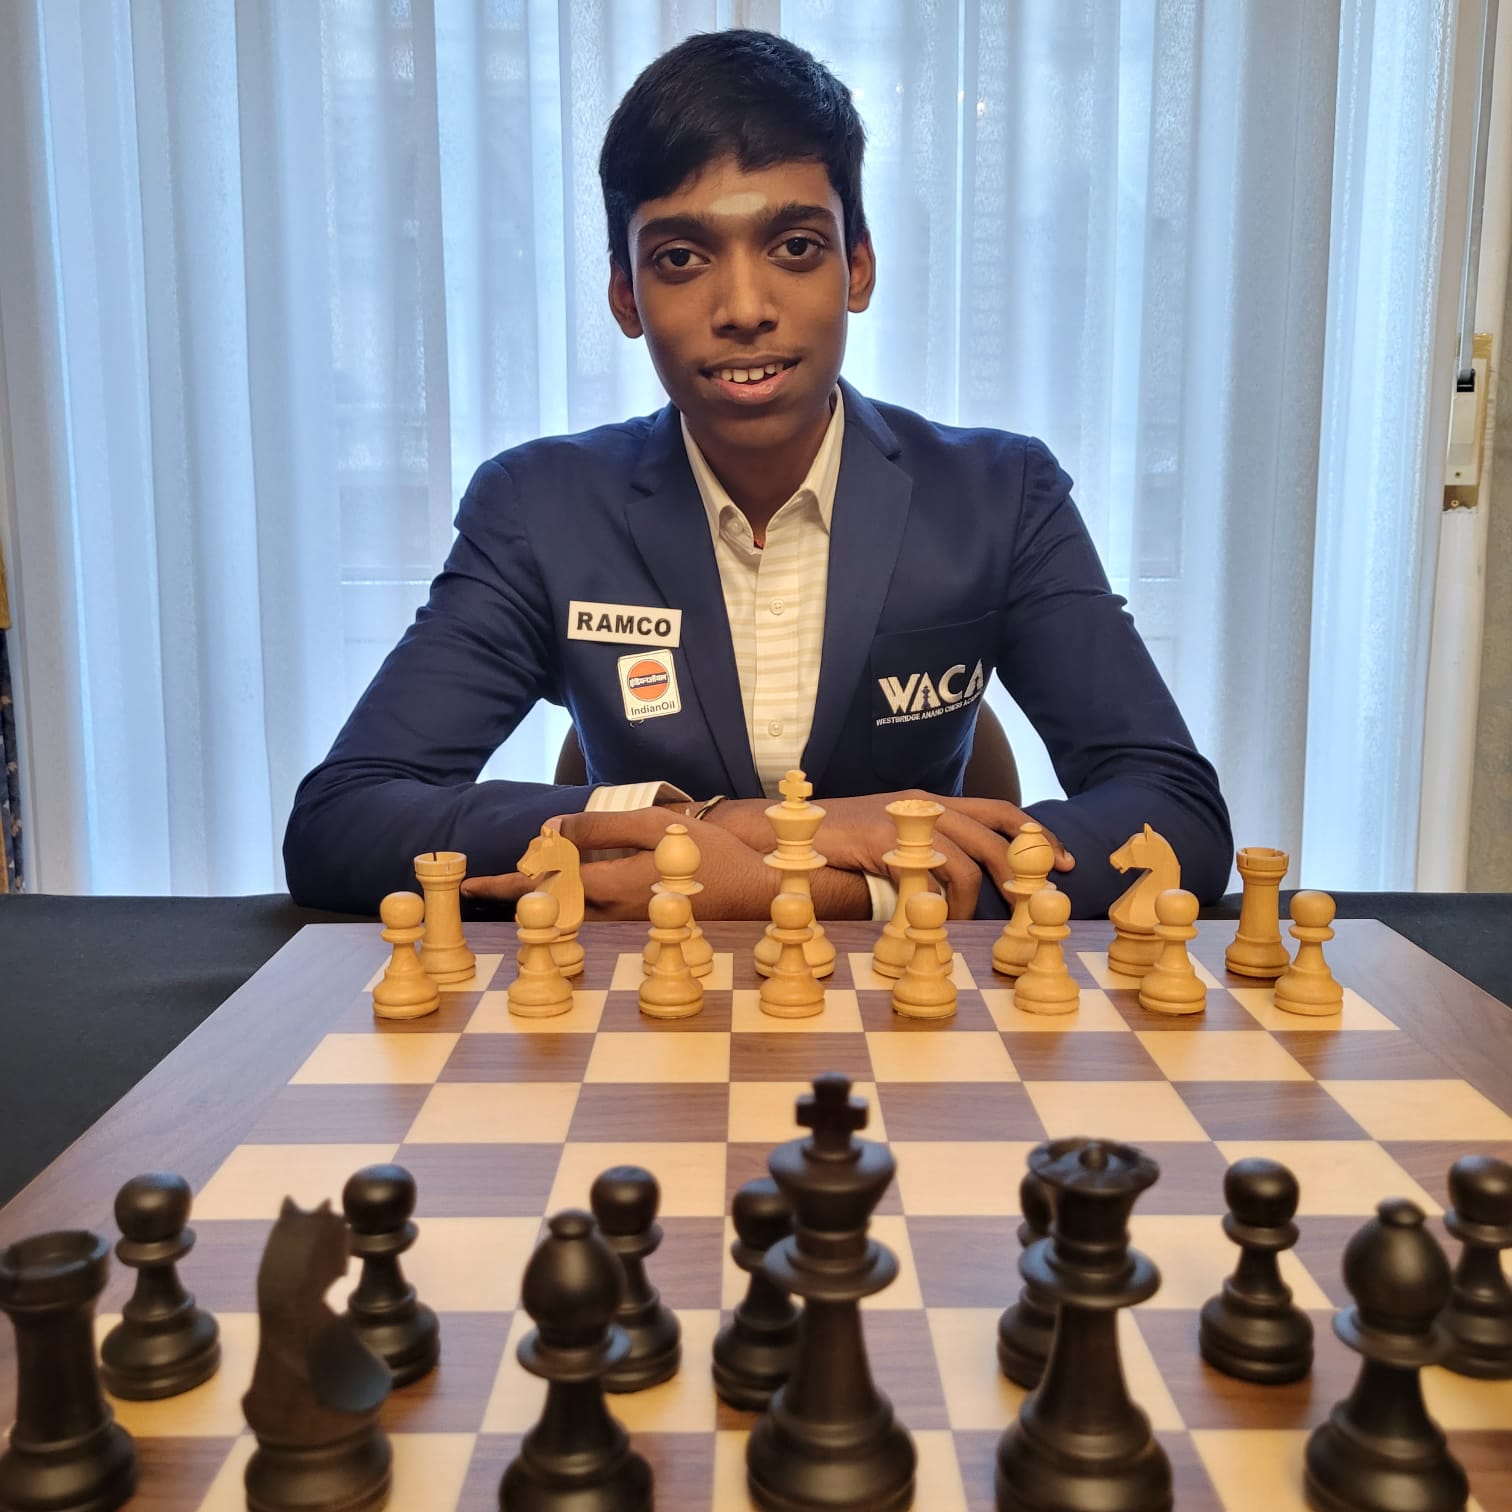 Praggnanandhaa's astronomical 2788 performance at the Xtracon Open 2019 